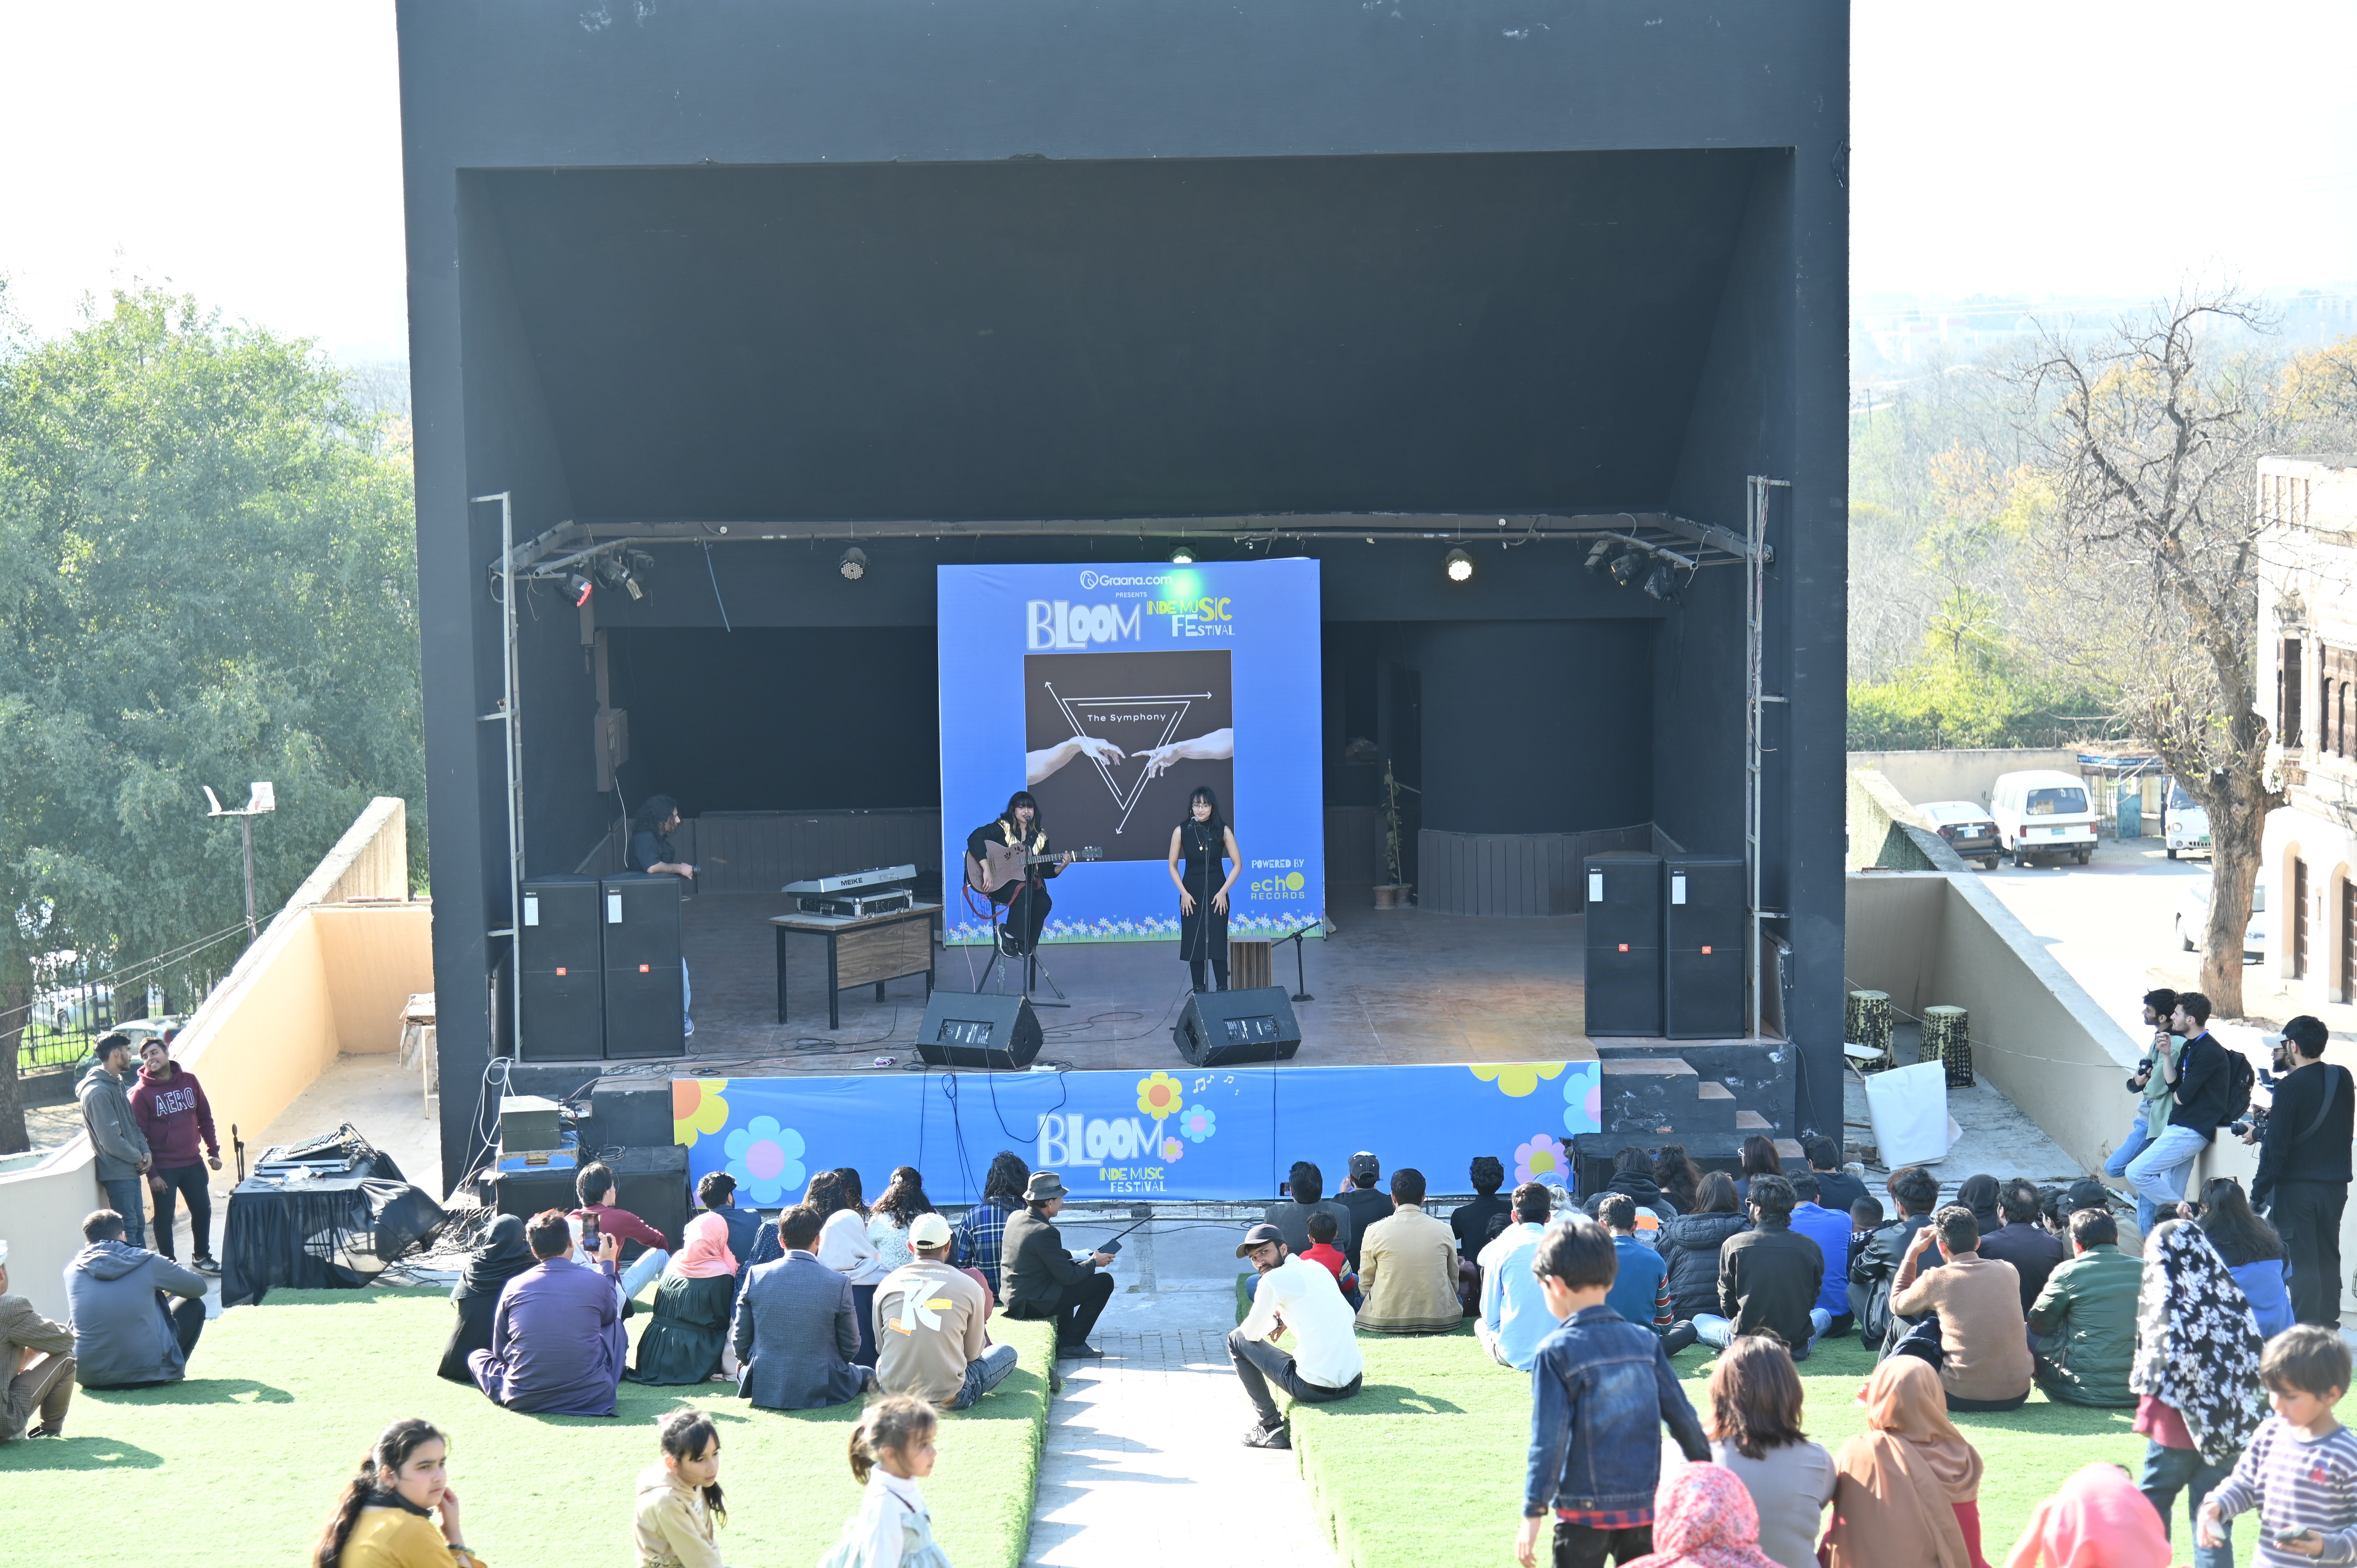 The concert at the event held at Lok Virsa